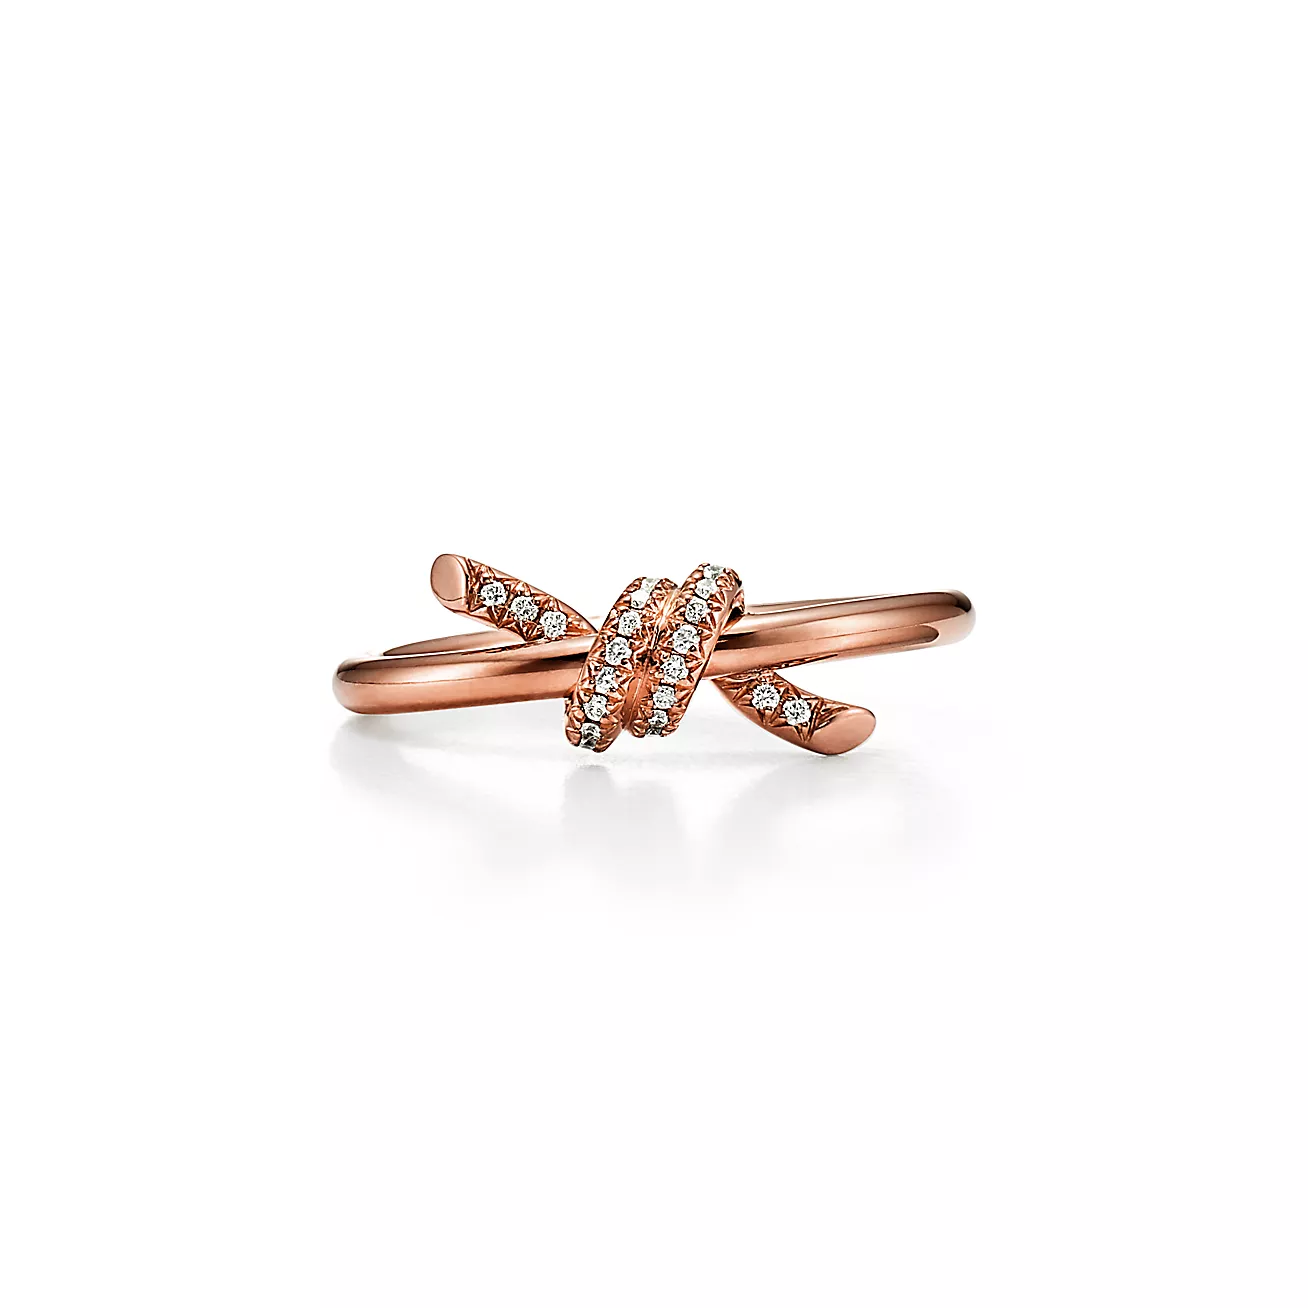 Tiffany Knot Ring in 18k Gold with Diamonds - Click Image to Close